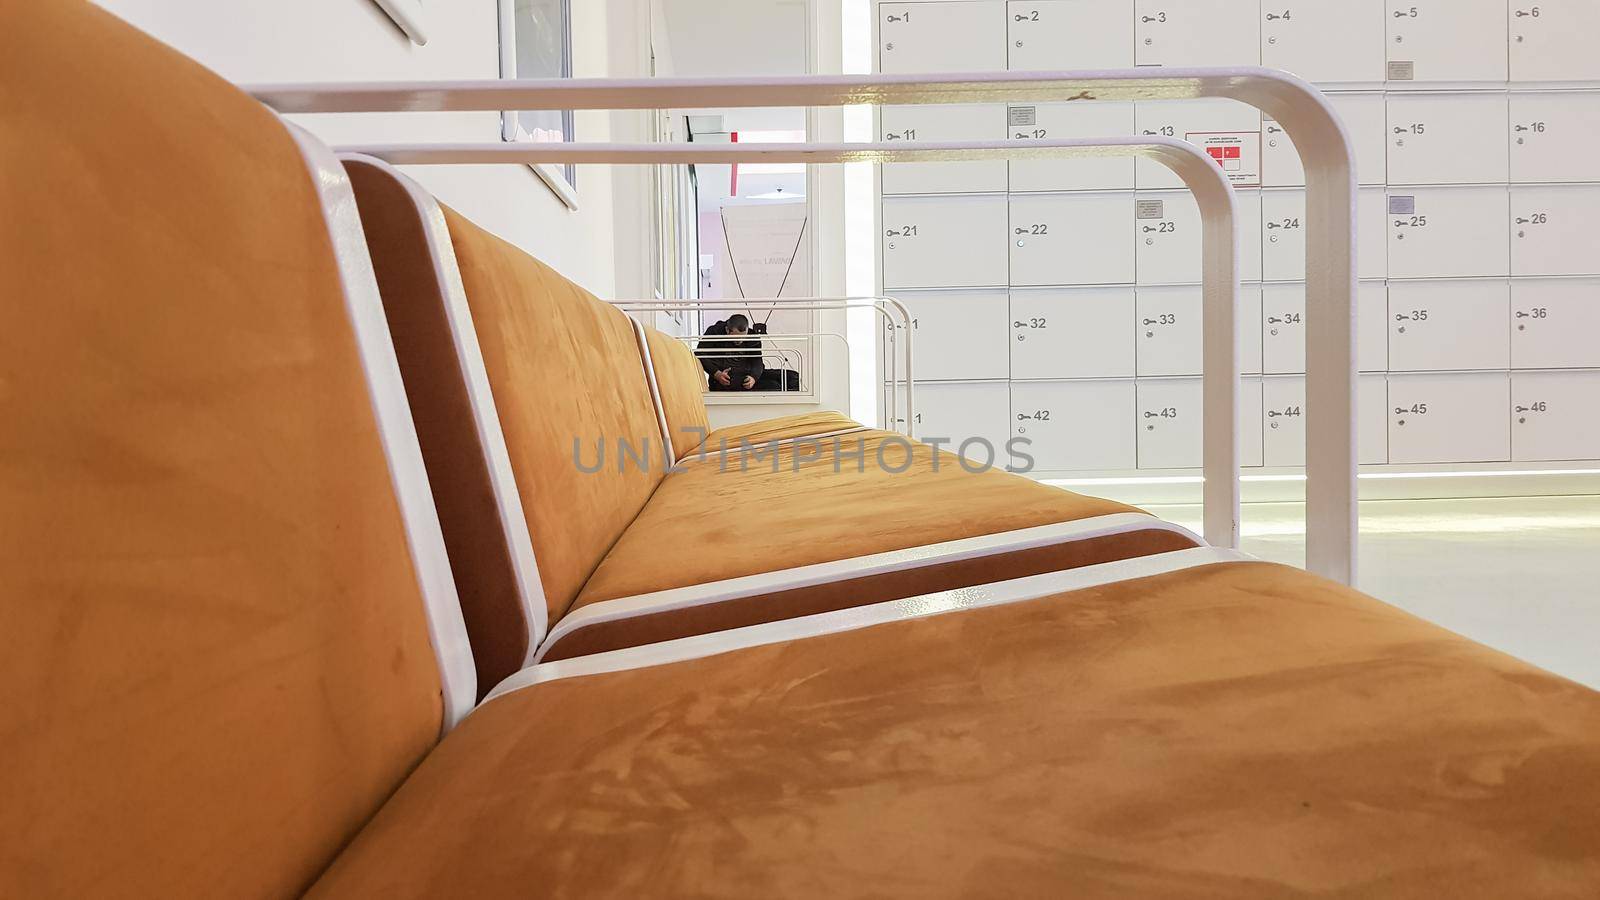 close-ups of benches upholstered in brown suede or leather with white metal railing in a cinema waiting room in a shopping center.